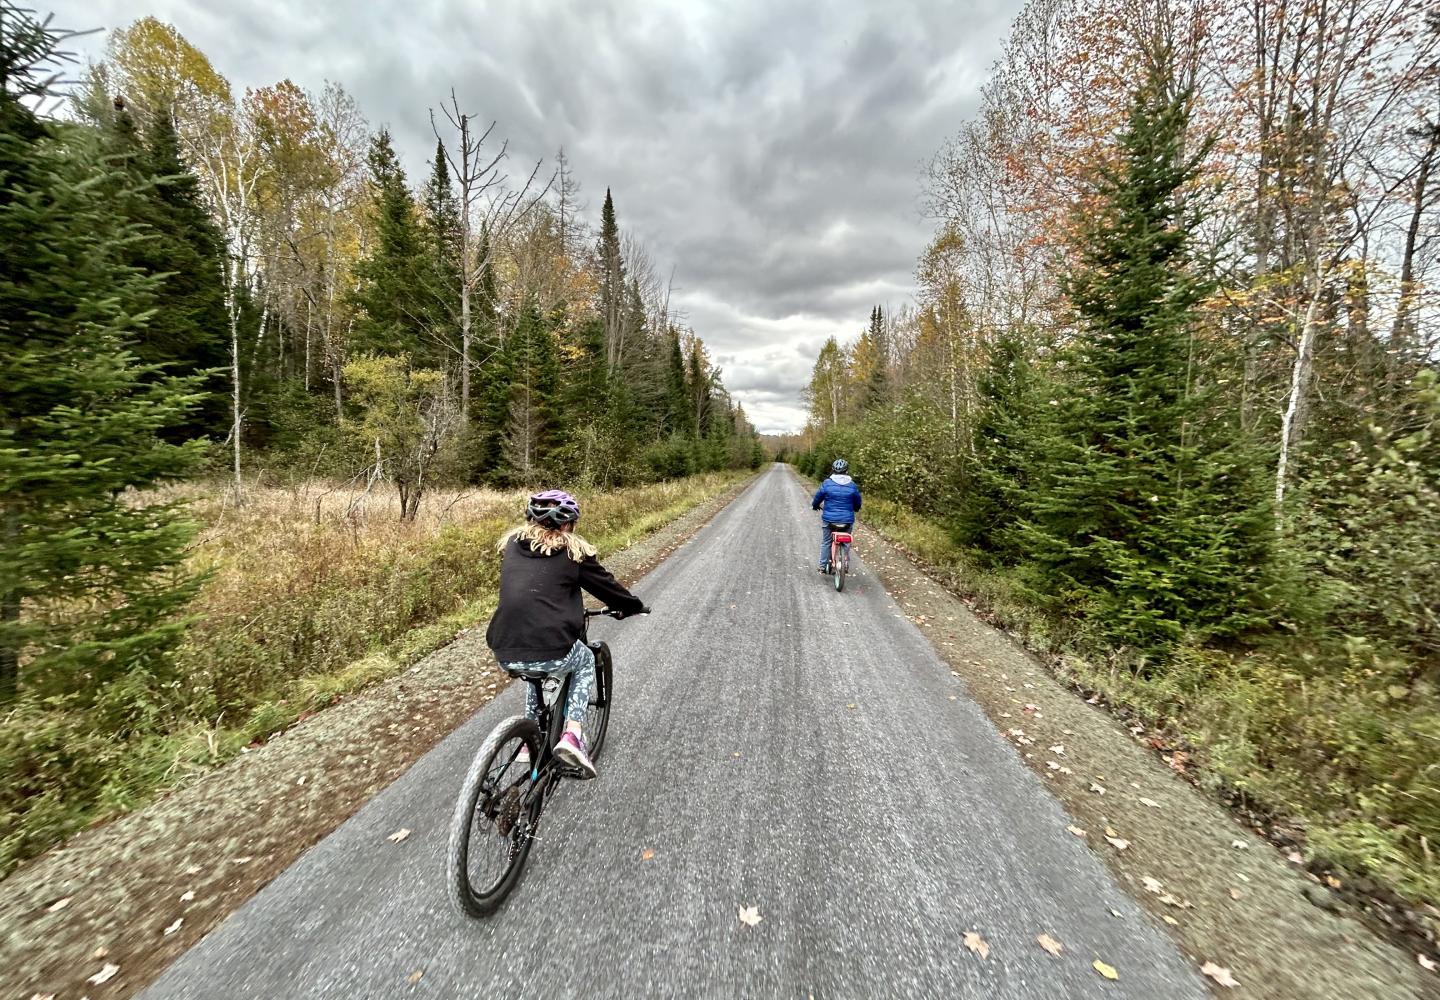 So close! This first segment of the Adirondack Rail Trail will open this fall, enabling cyclists to ride 10 miles from Lake Placid to Saranac Lake (or vice versa). 